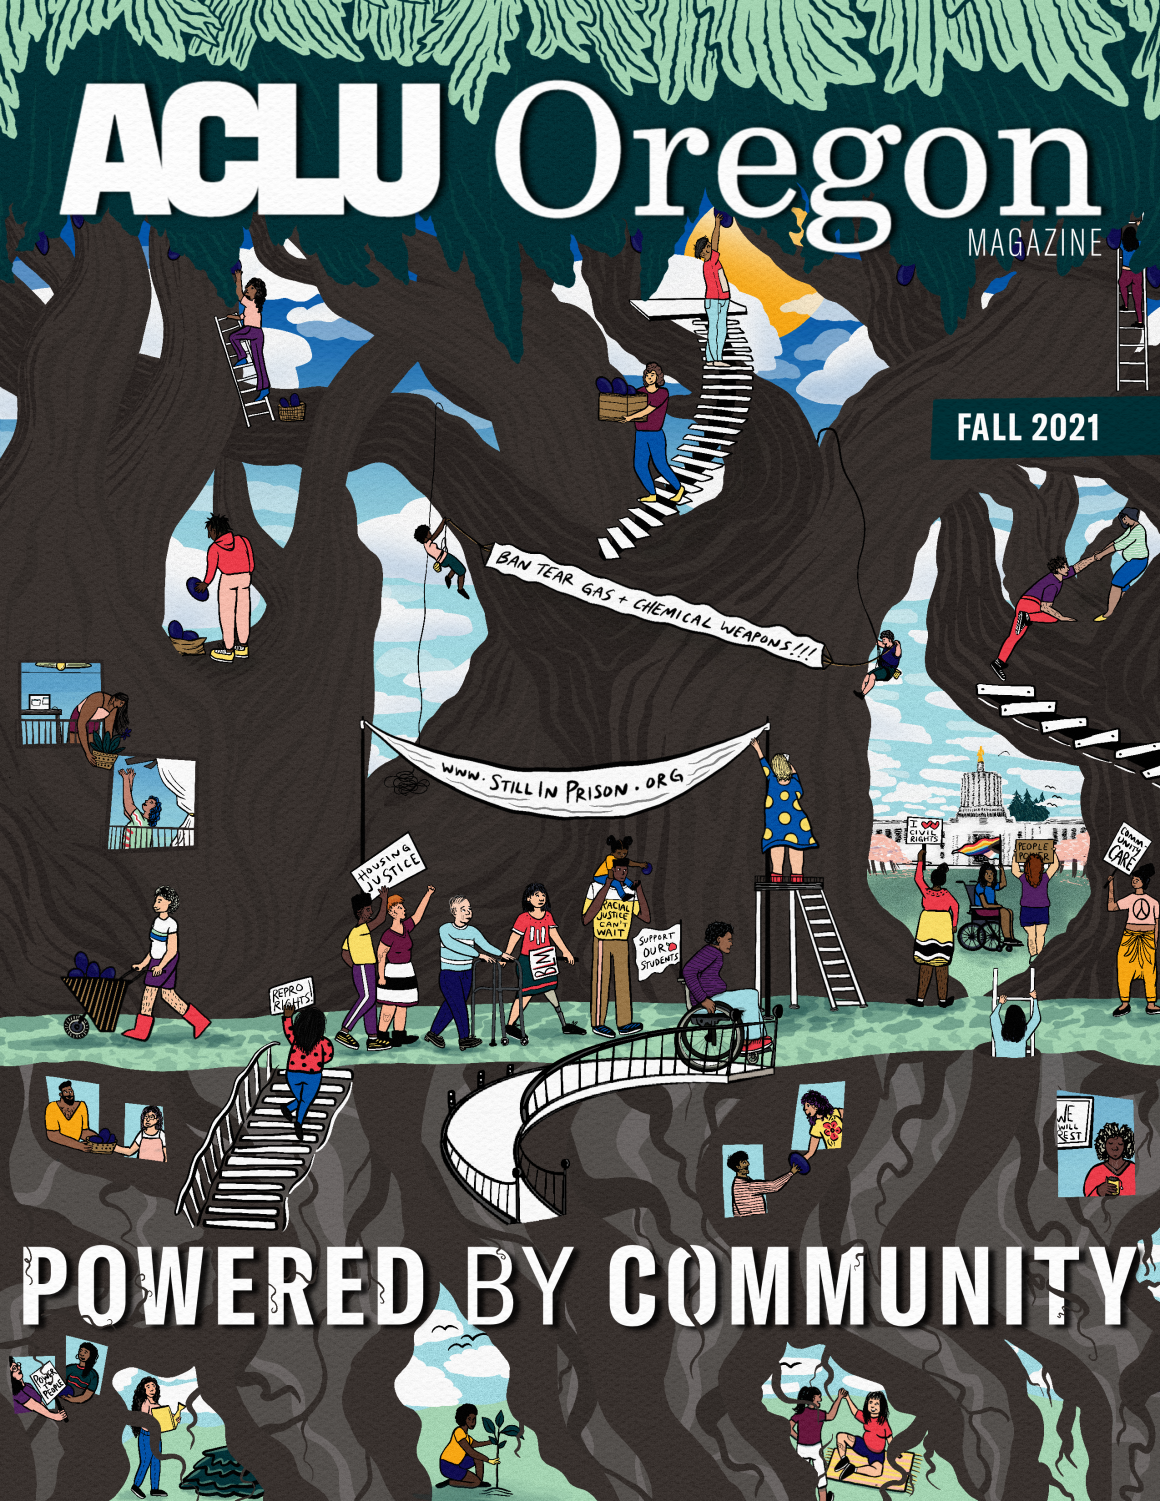 Magazine cover with people from different backgrounds and abilities working and rallying together on a fruit bearing tree